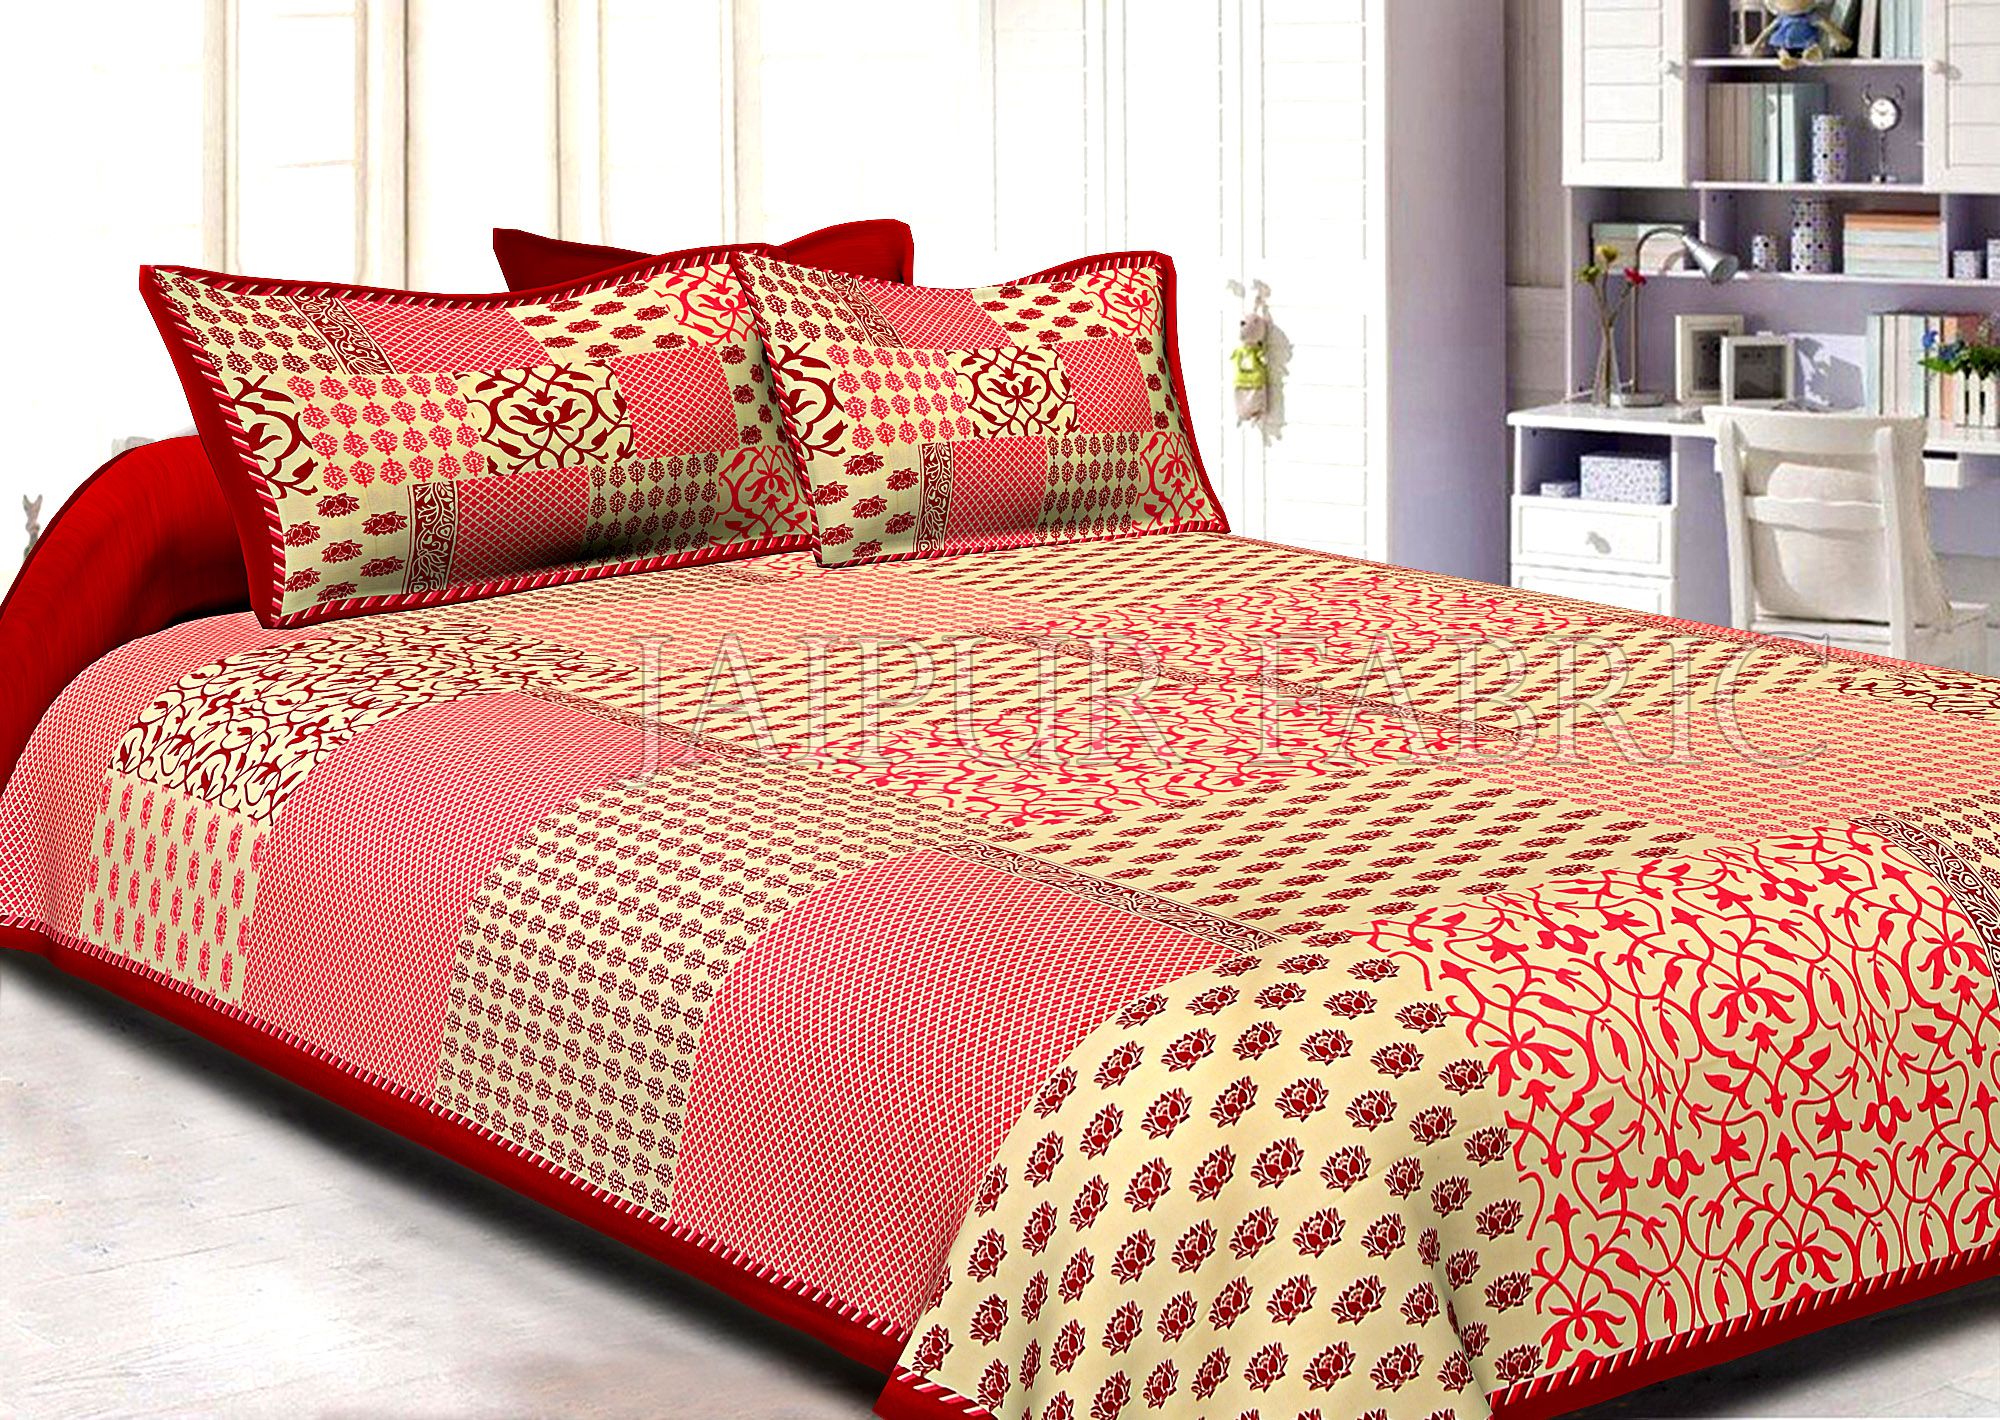 Mahroon Border With Small Lotus Rangoli And Check Print Designer Pattern Fine Coton Poplin Double Bedsheet With Two Pillow Cover